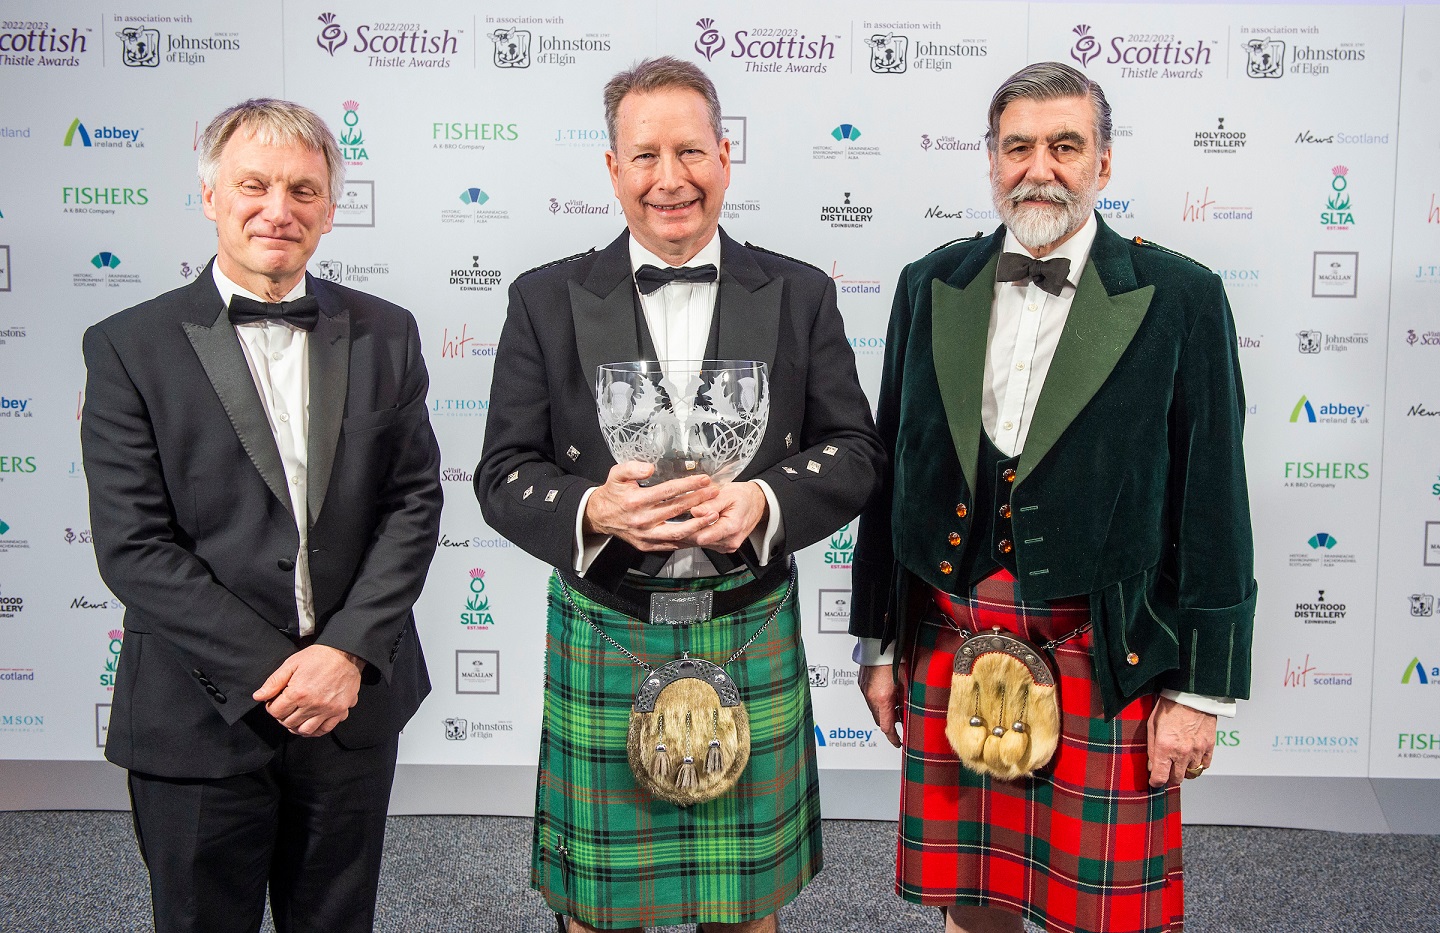 Tourism Minister Ivan McKee, Calum Ross and VisitScotland Chair Lord Thurso at the Scottish Thistle Awards National Final